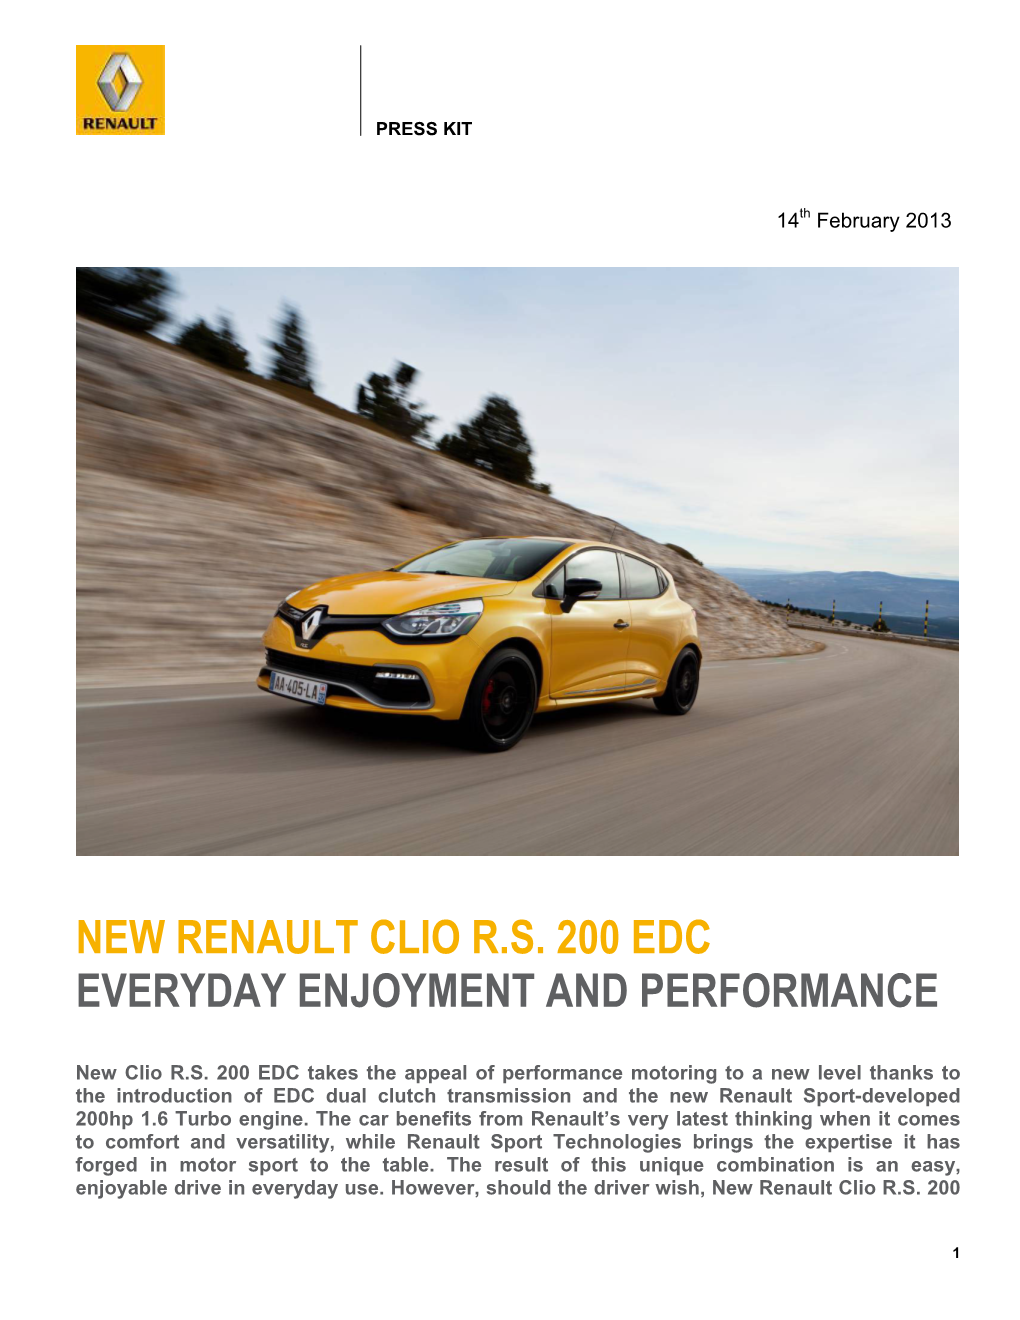 New Renault Clio Rs 200